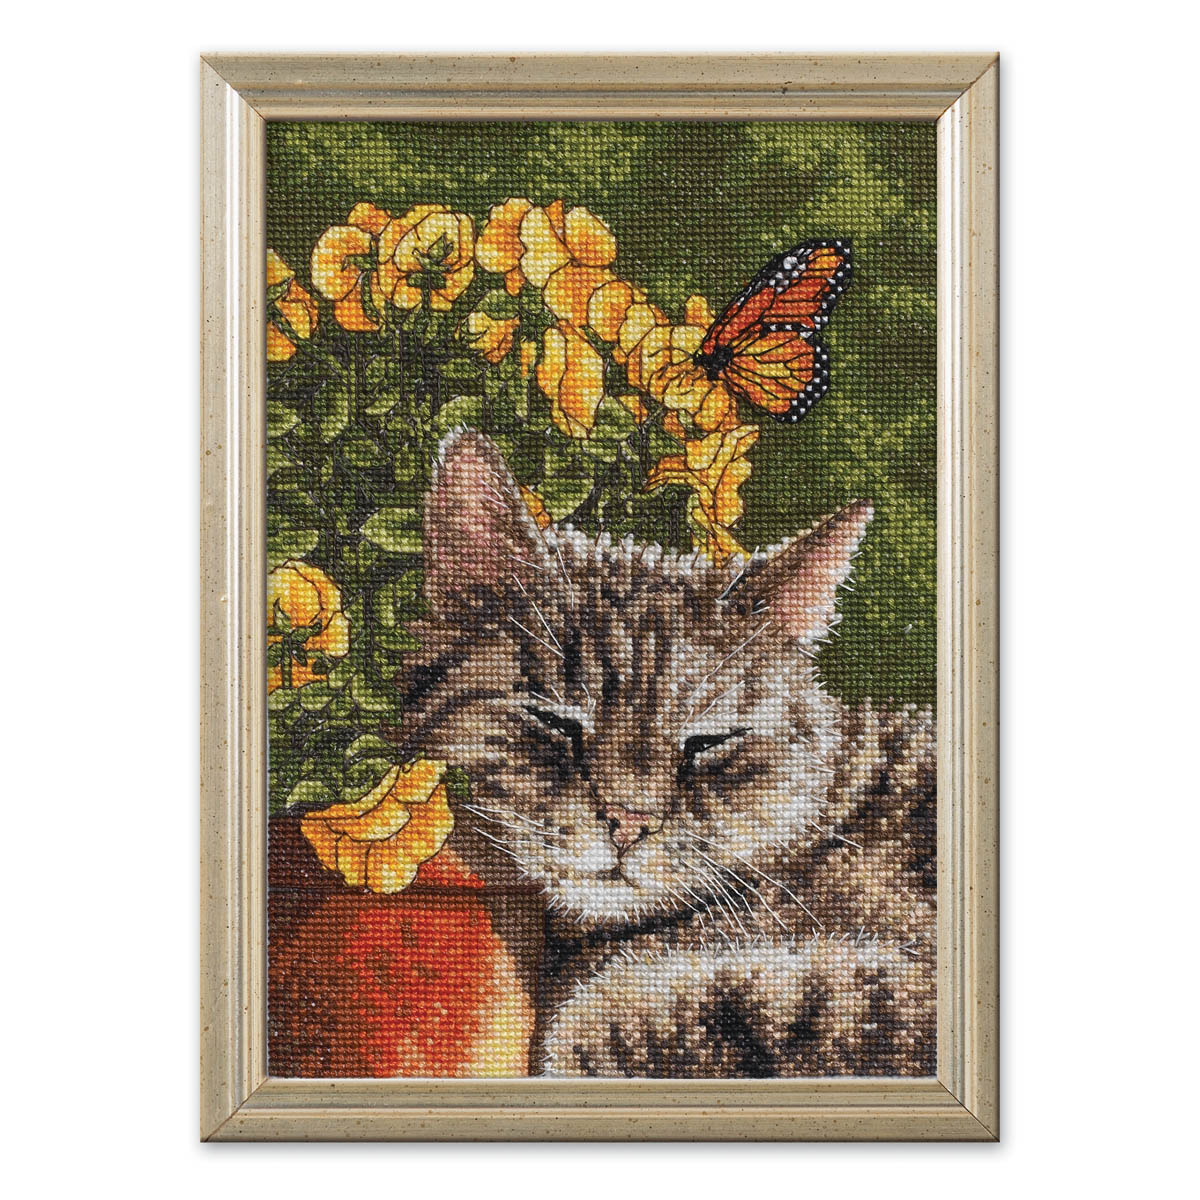 Bucilla ® Counted Cross Stitch - Picture Kits - Mini - Afternoon Nap - WM45700